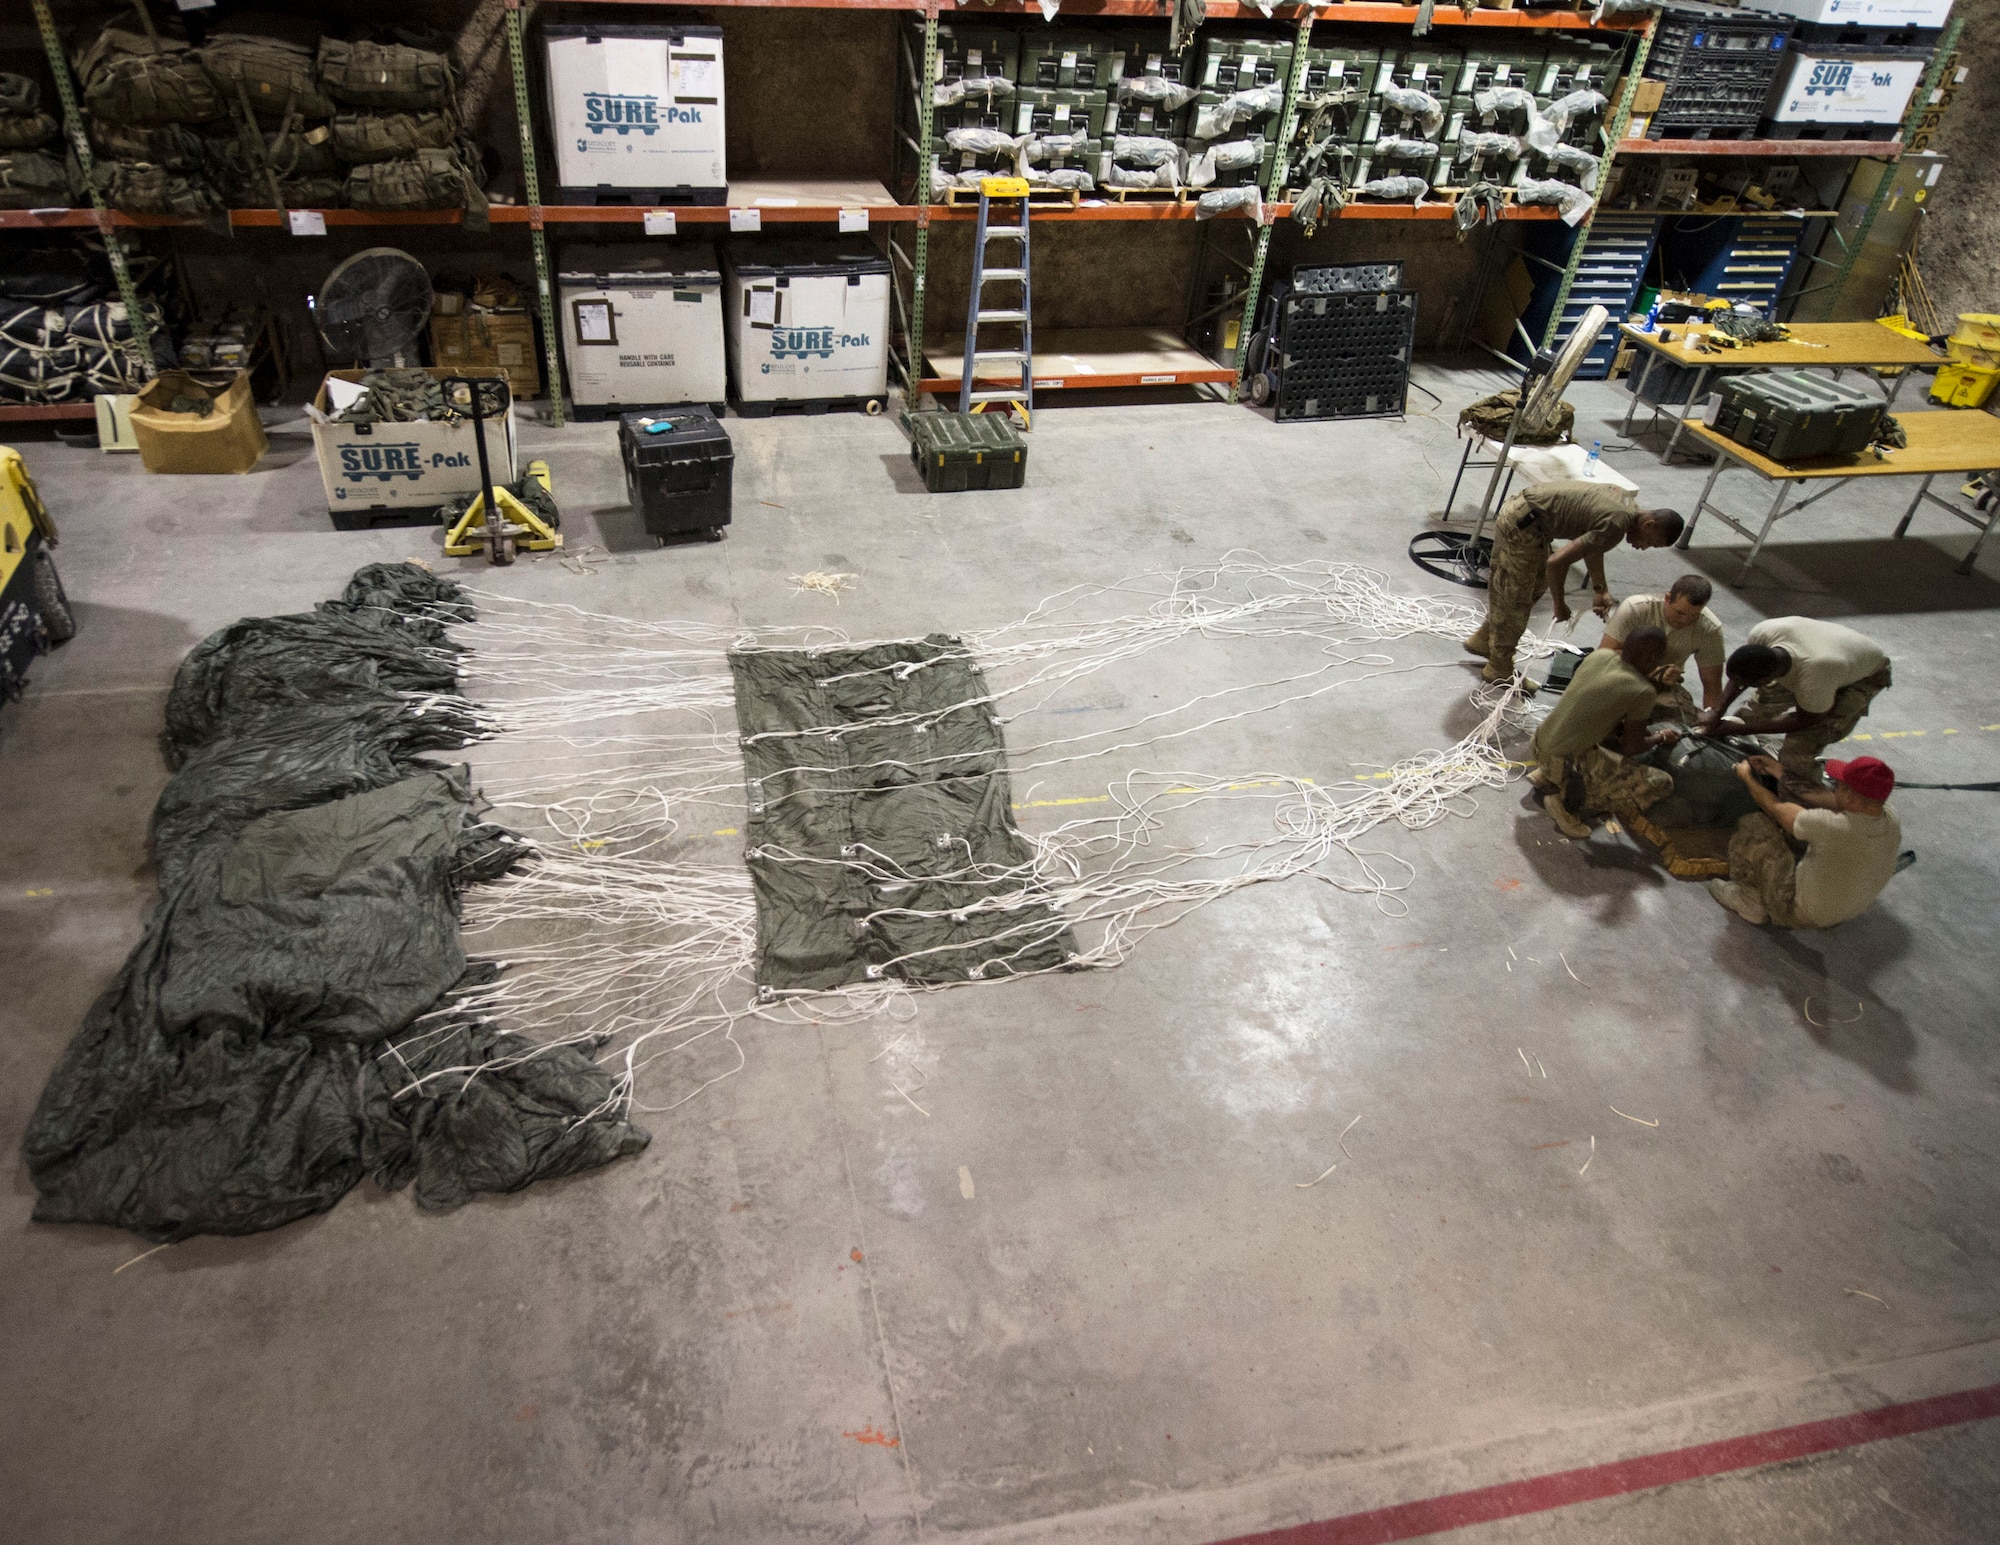 U.S. Army Soldiers with the 824th Quartermaster Company Detachment 2 prepare to pack a joint precision airdrop system at Al Udeid Air Base, Qatar, May 31, 2017. The Soldiers unpacked a JPADS in order to conduct an inspection that included, but was not limited to, cleaning and any repairs necessary on the system that is used in airdrop operations. (U.S. Air Force photo by Tech. Sgt. Amy M. Lovgren)